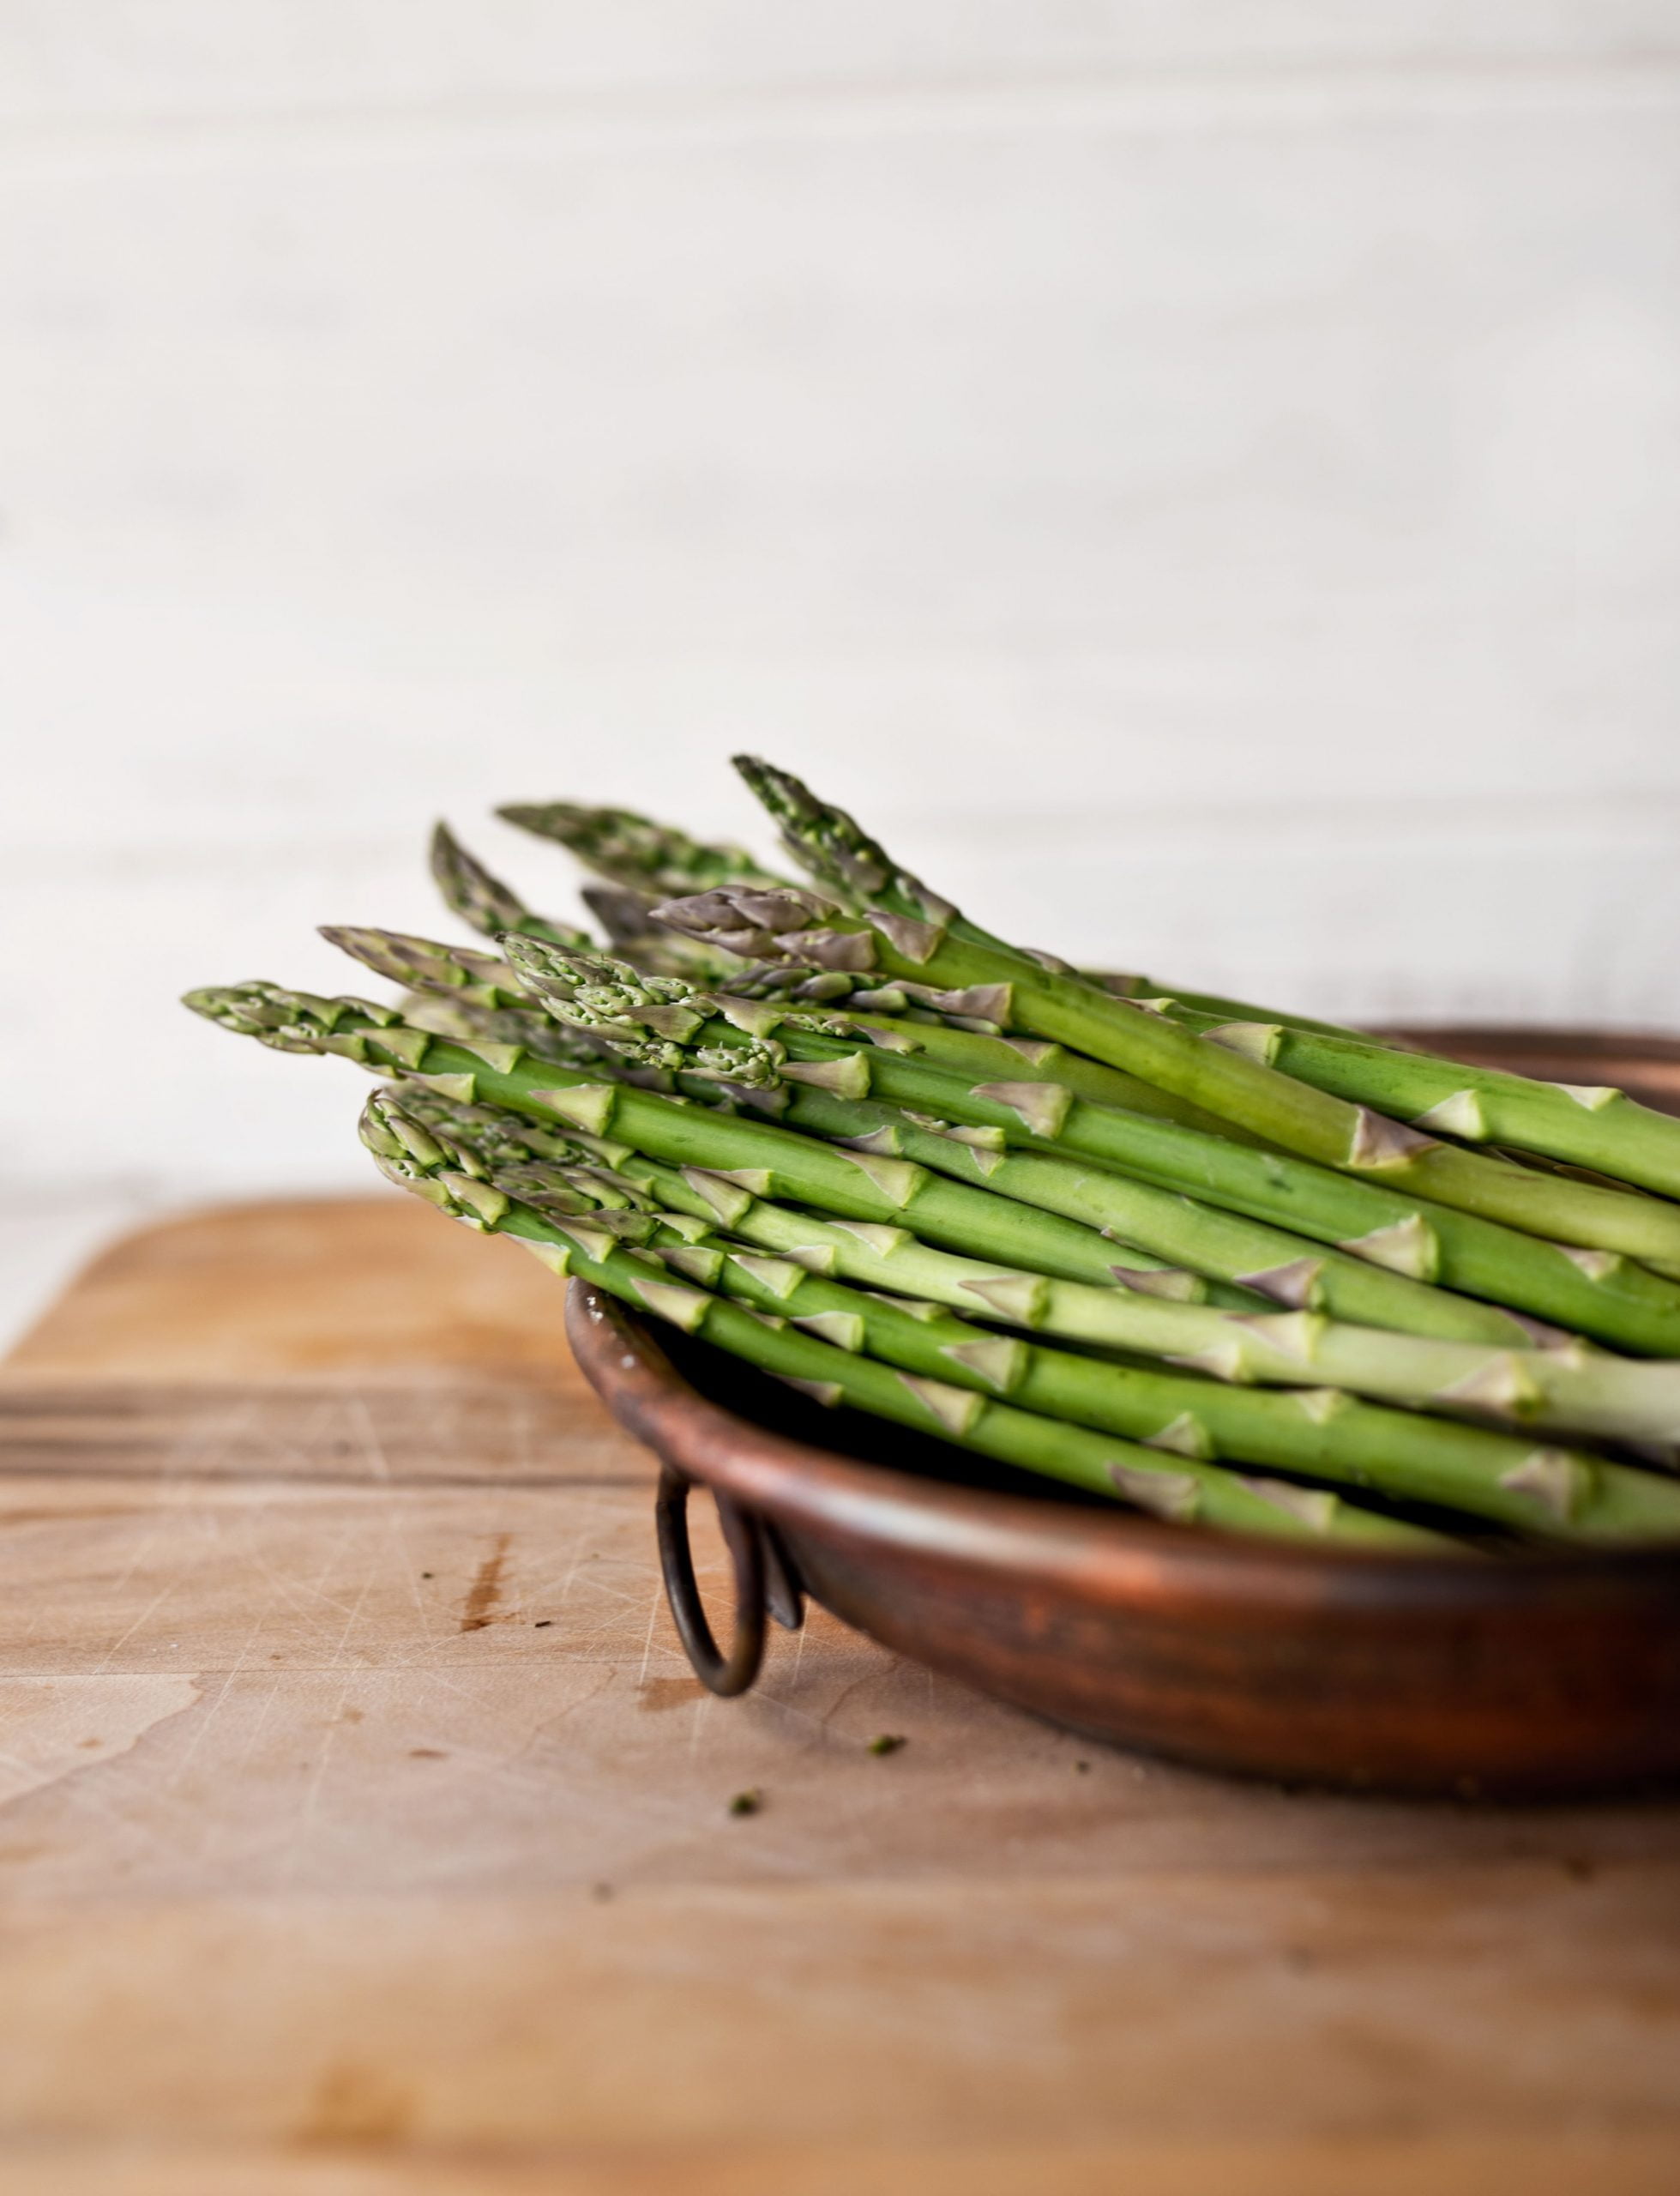 How Long Does It Take To Grow Asparagus From Seed?